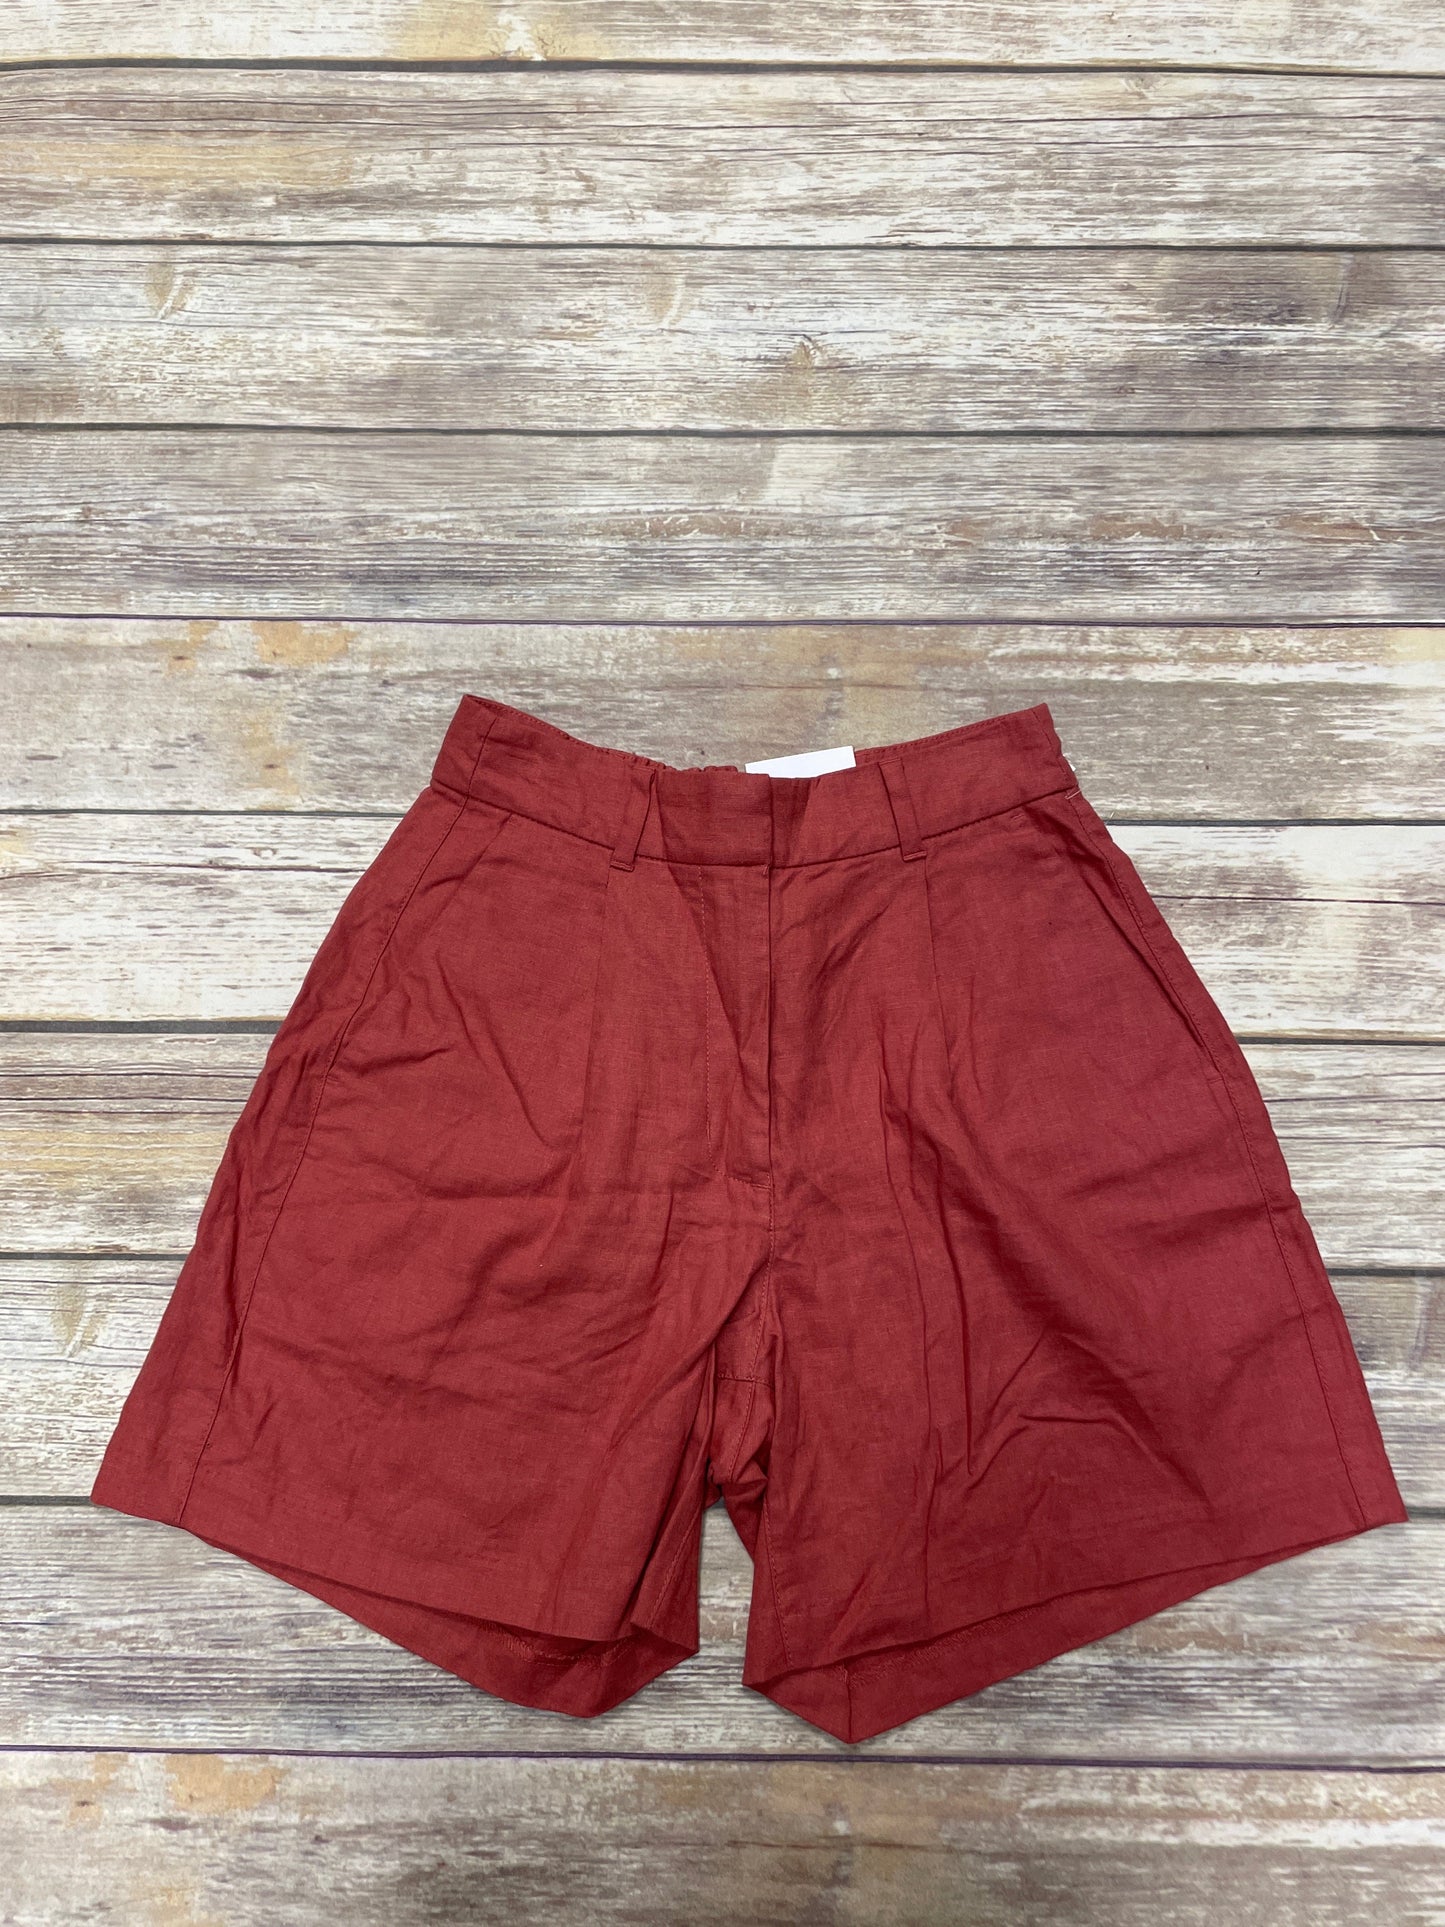 Red Shorts Old Navy, Size S